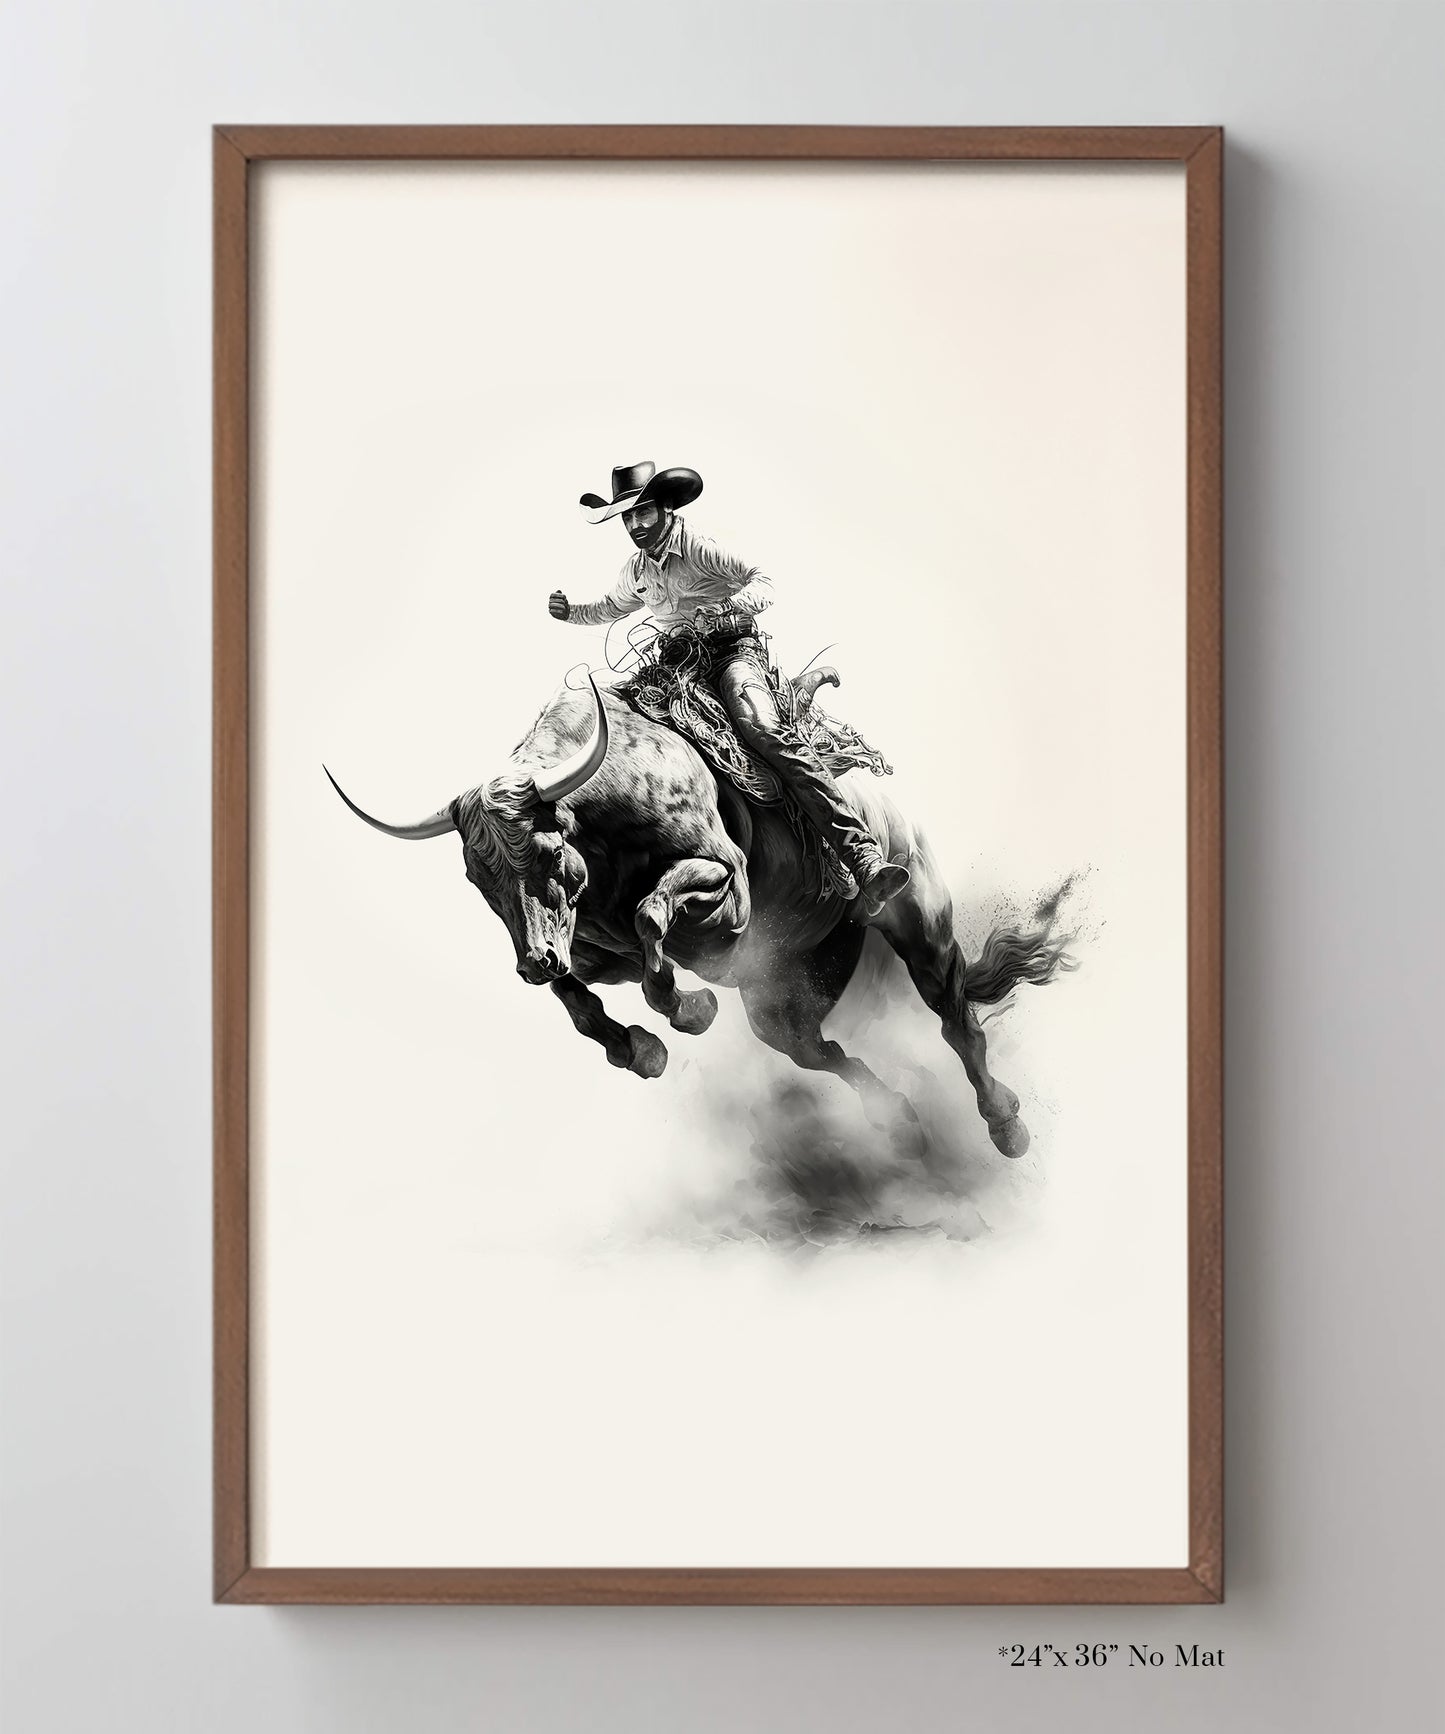 Action Riders #2 of 3 - The Bull Rider